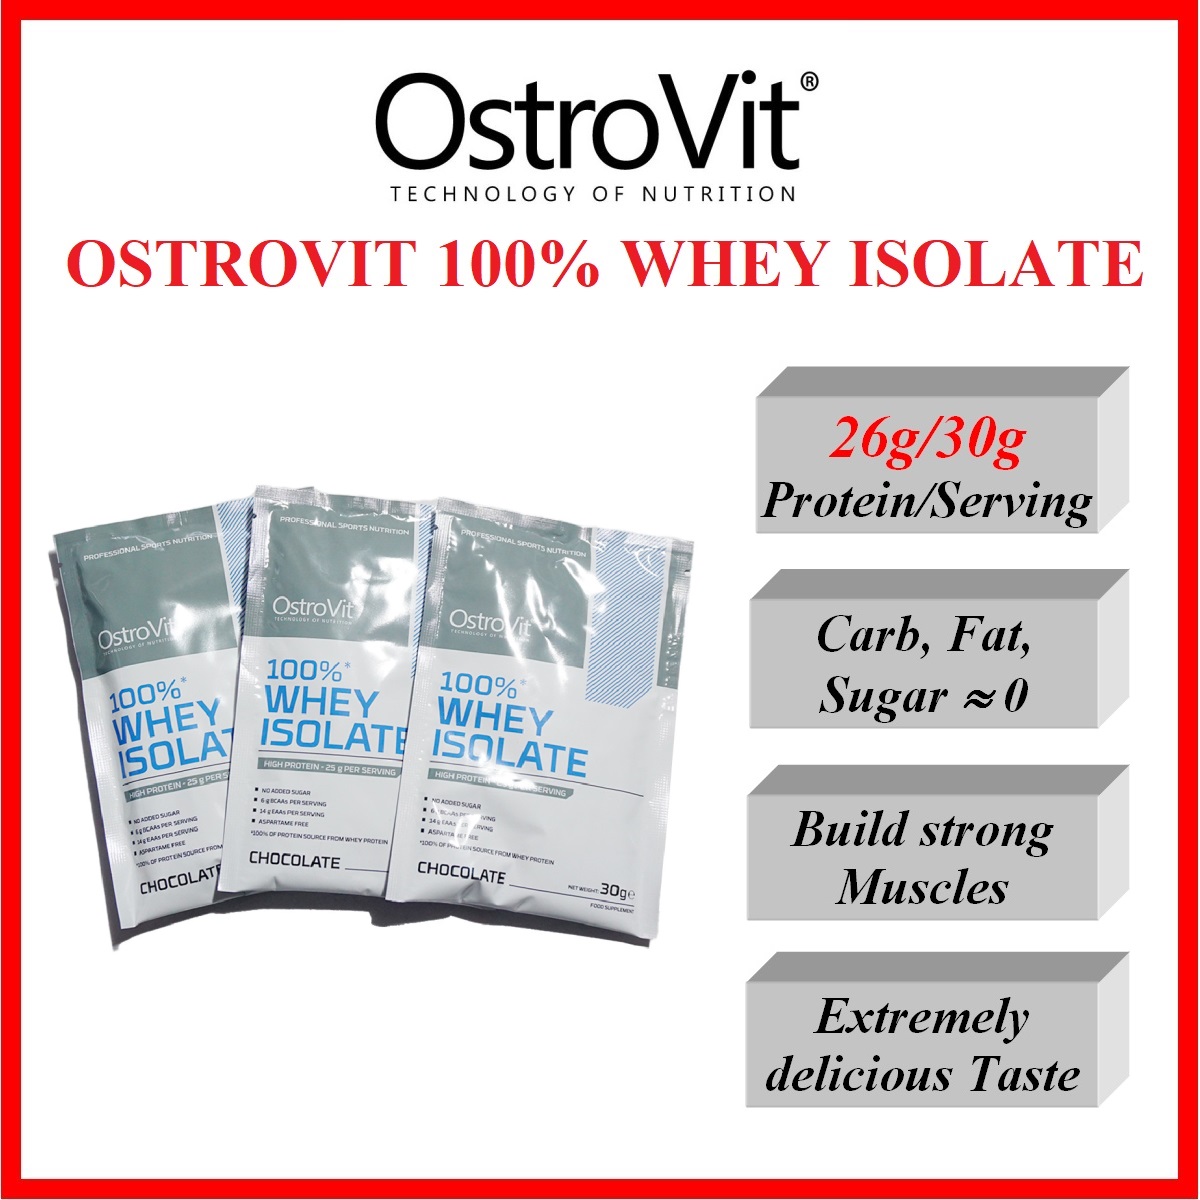 Gói Sample Ostrovit Whey Protein Isolate 01 lần dùng 100% Isolate Protein